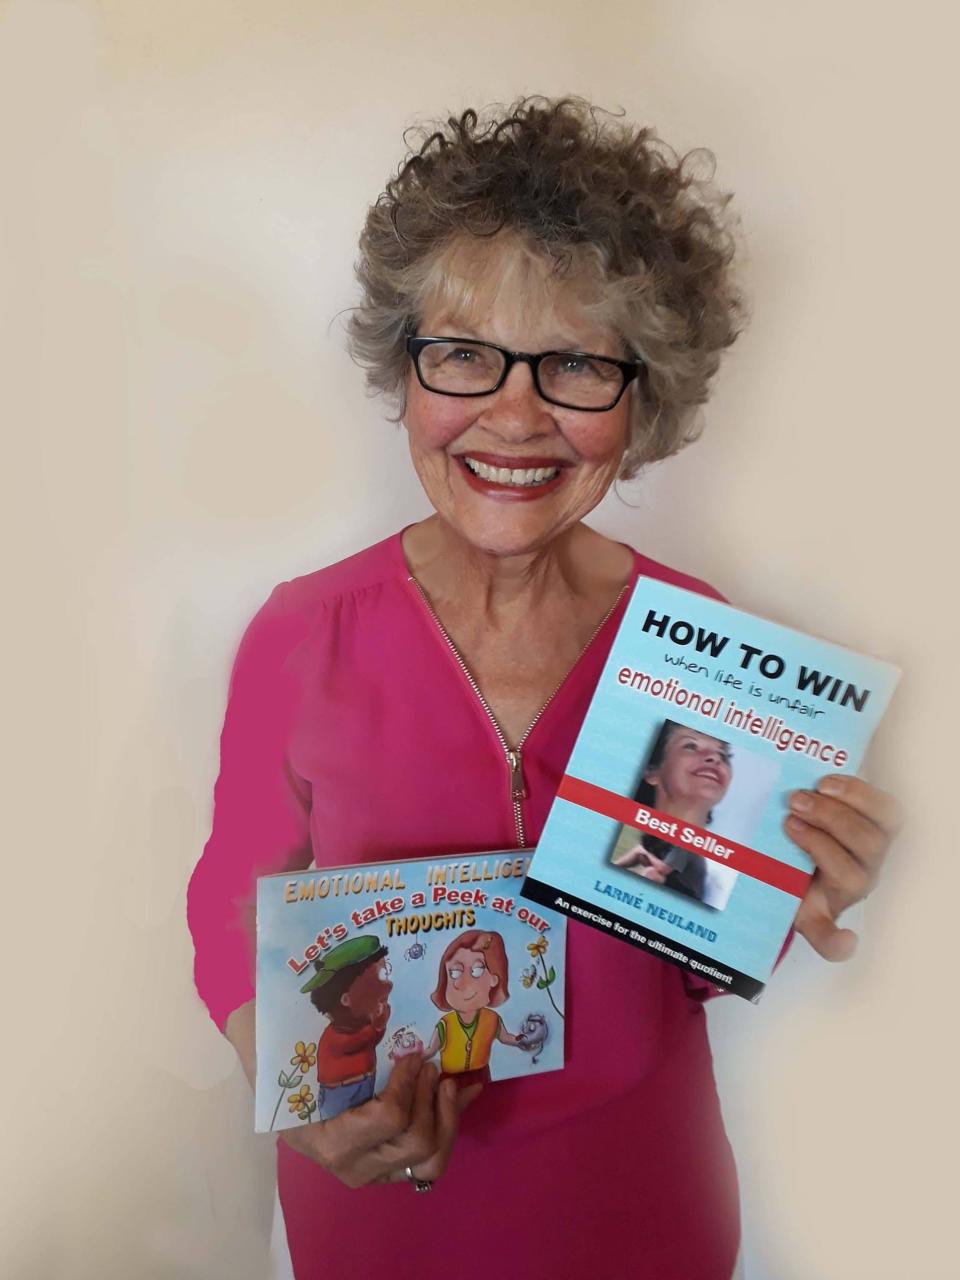 Larne Neuland, an author from South African, has written children's books on emotional intelligence and how to think positively.